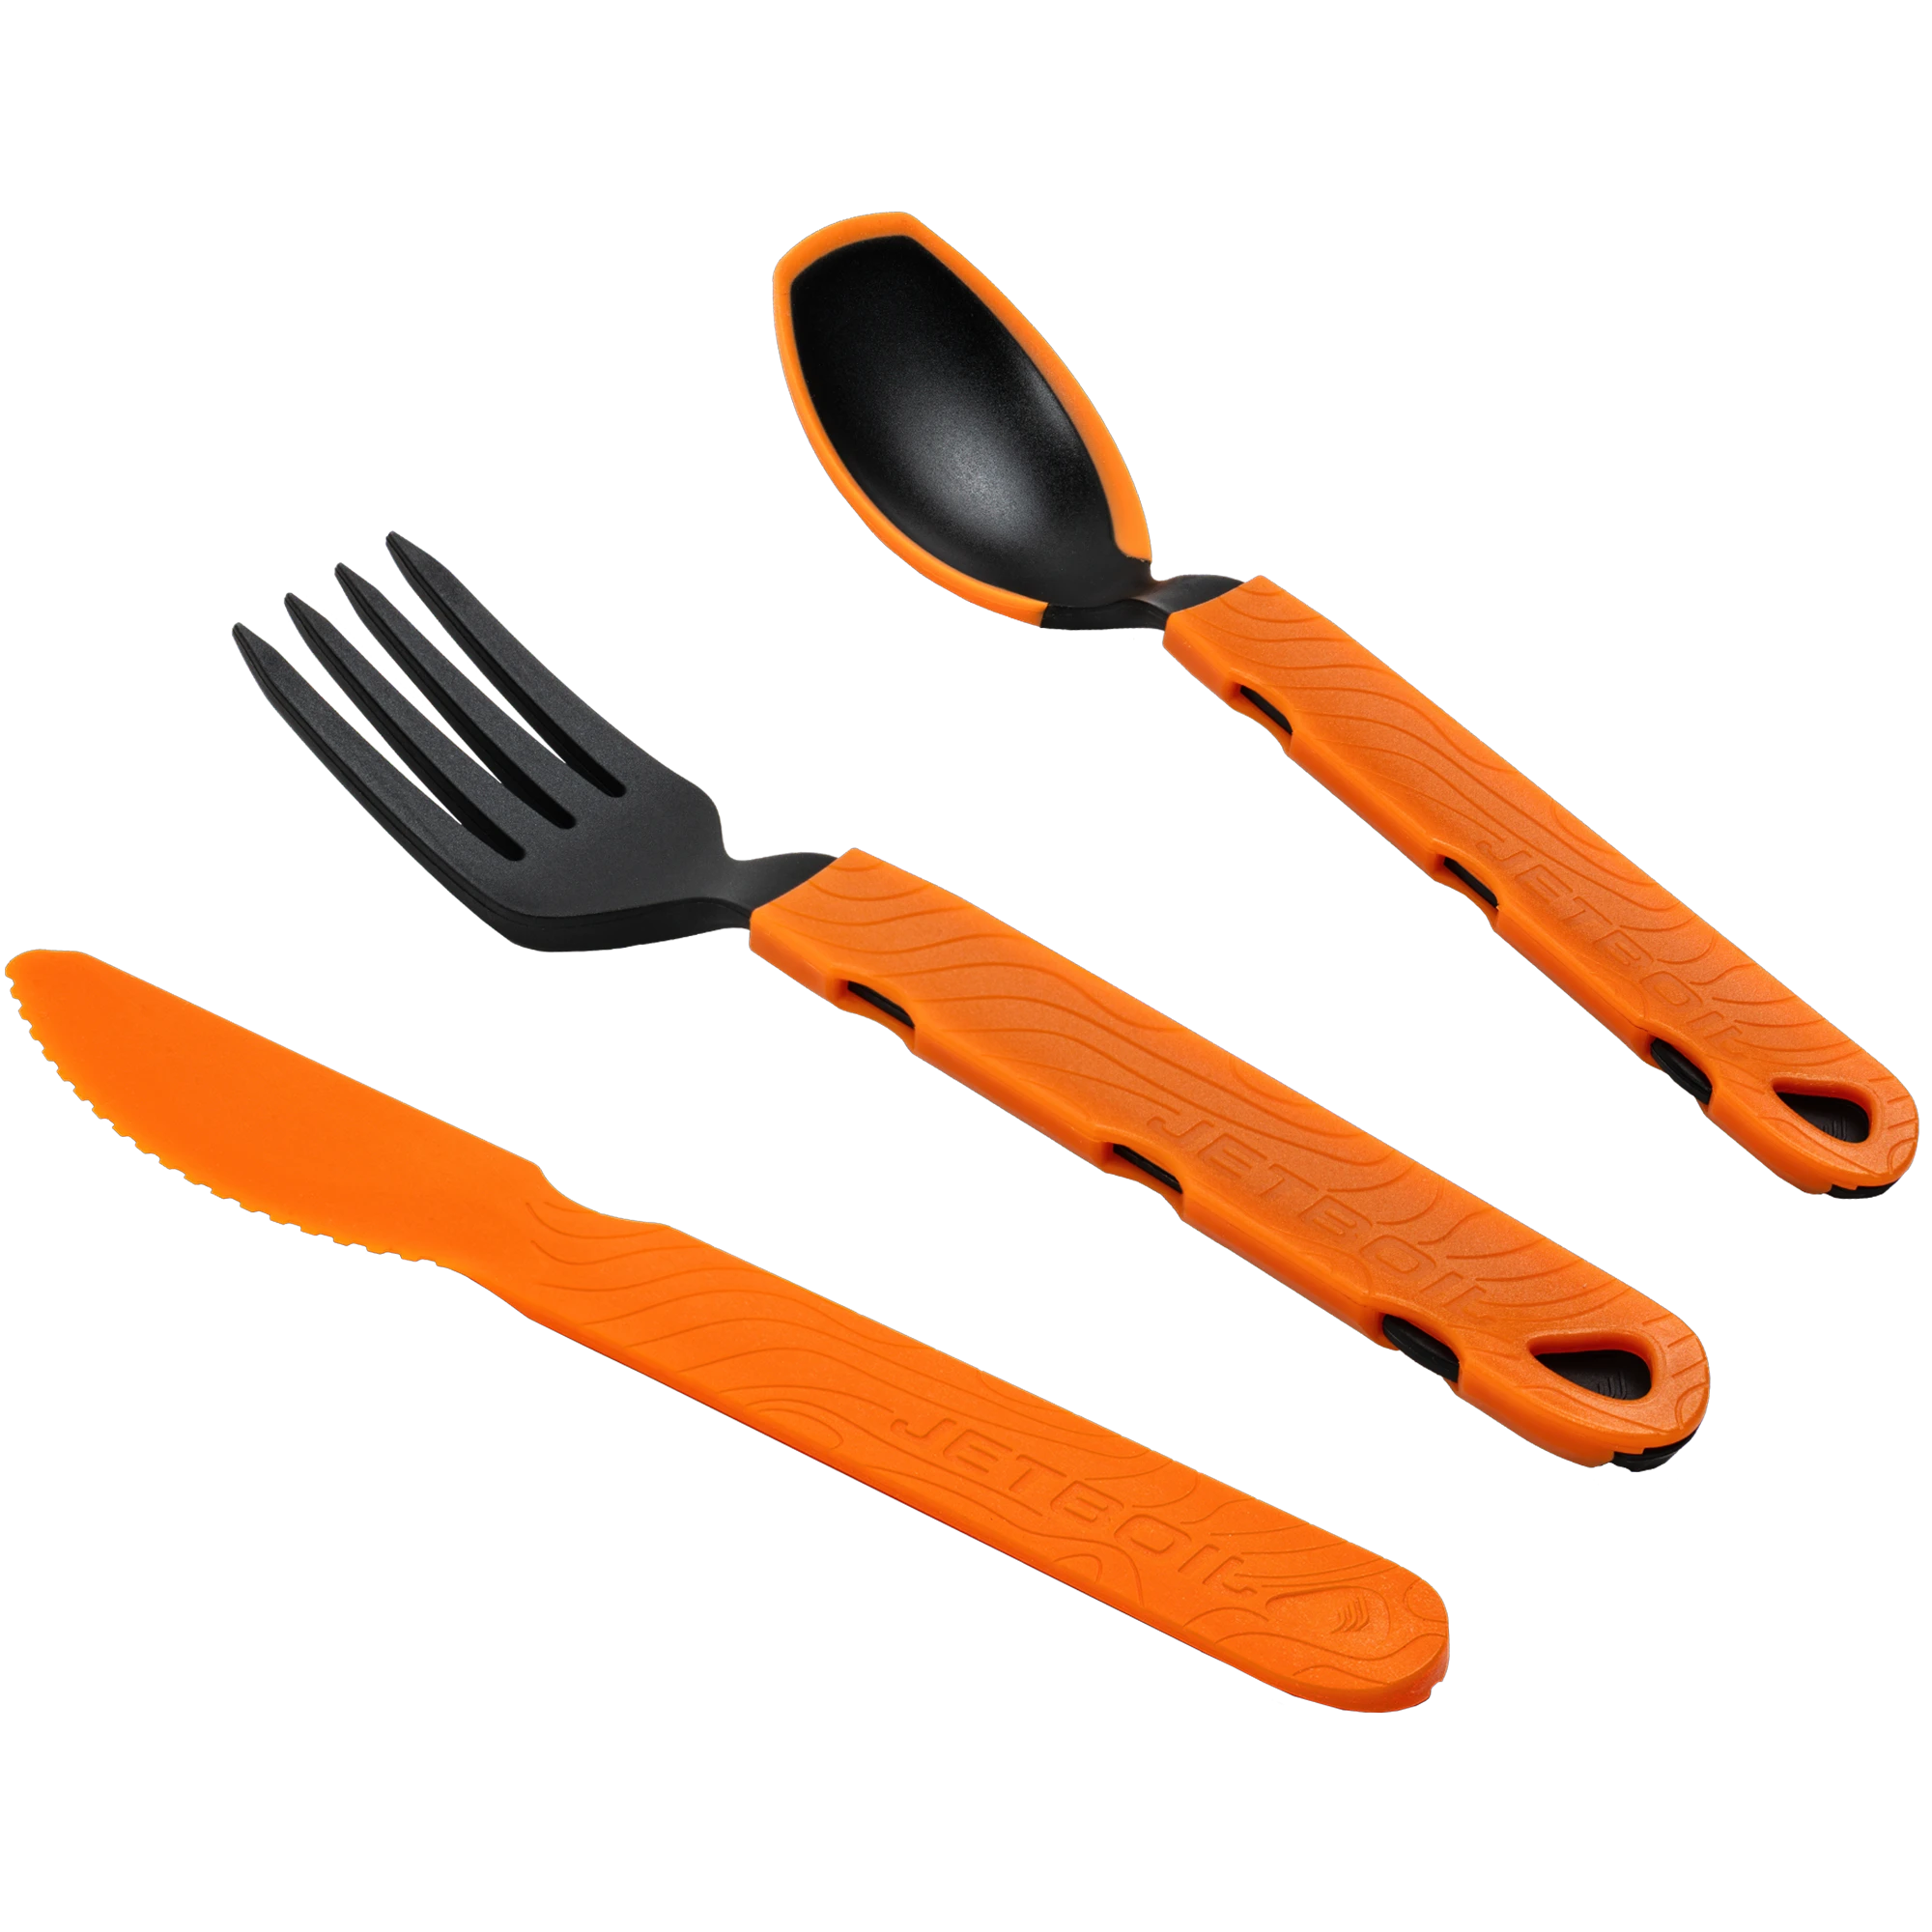 Jetboil TrailWare knife, fork and spoon set